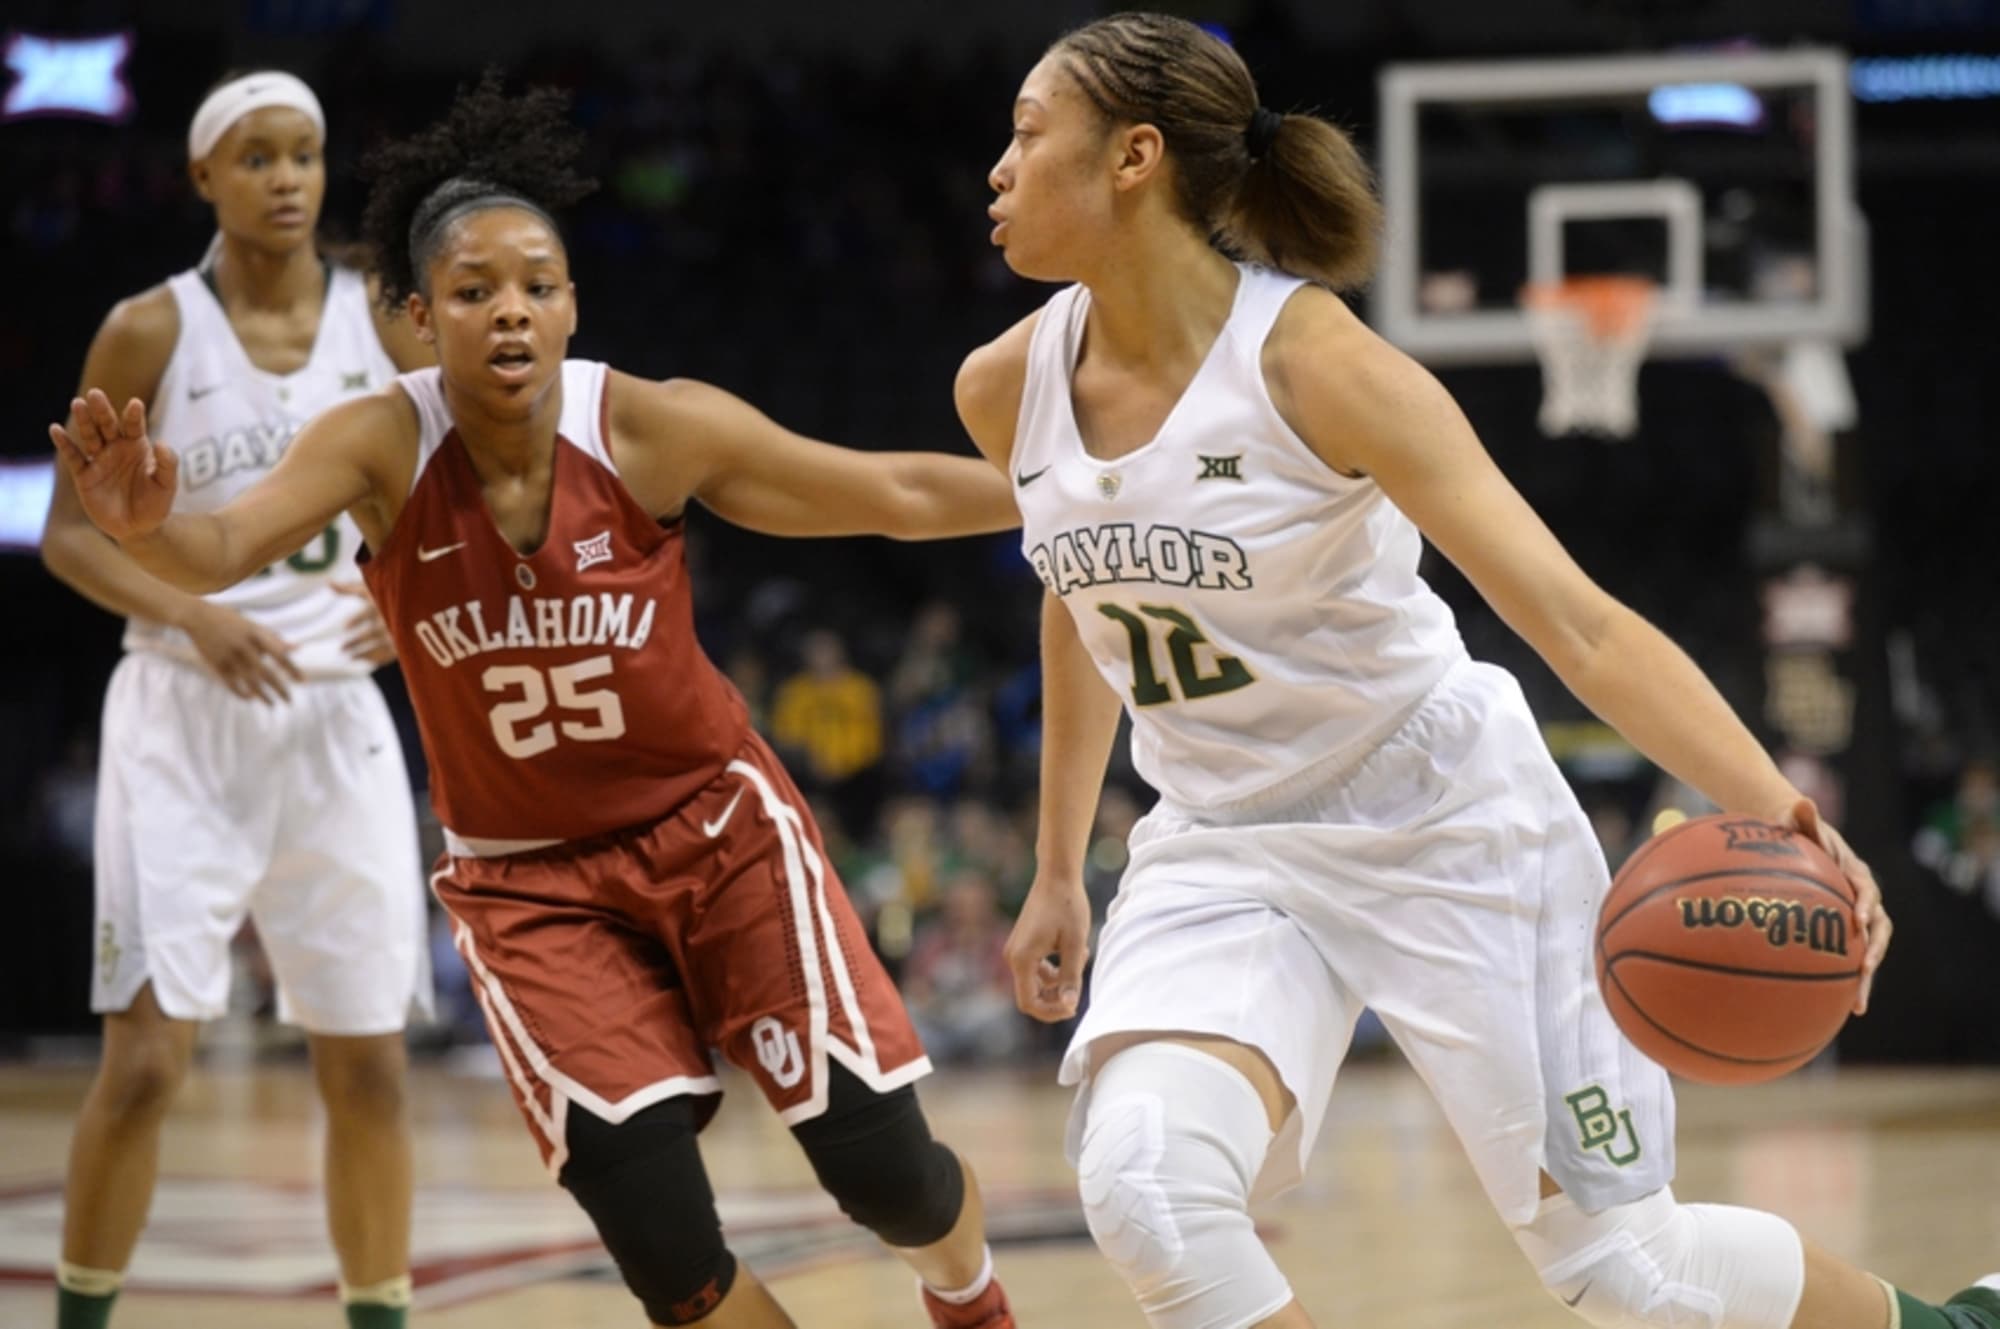 Oklahoma Women's Basketball Sooners Defeat Purdue to Advance in NCAA